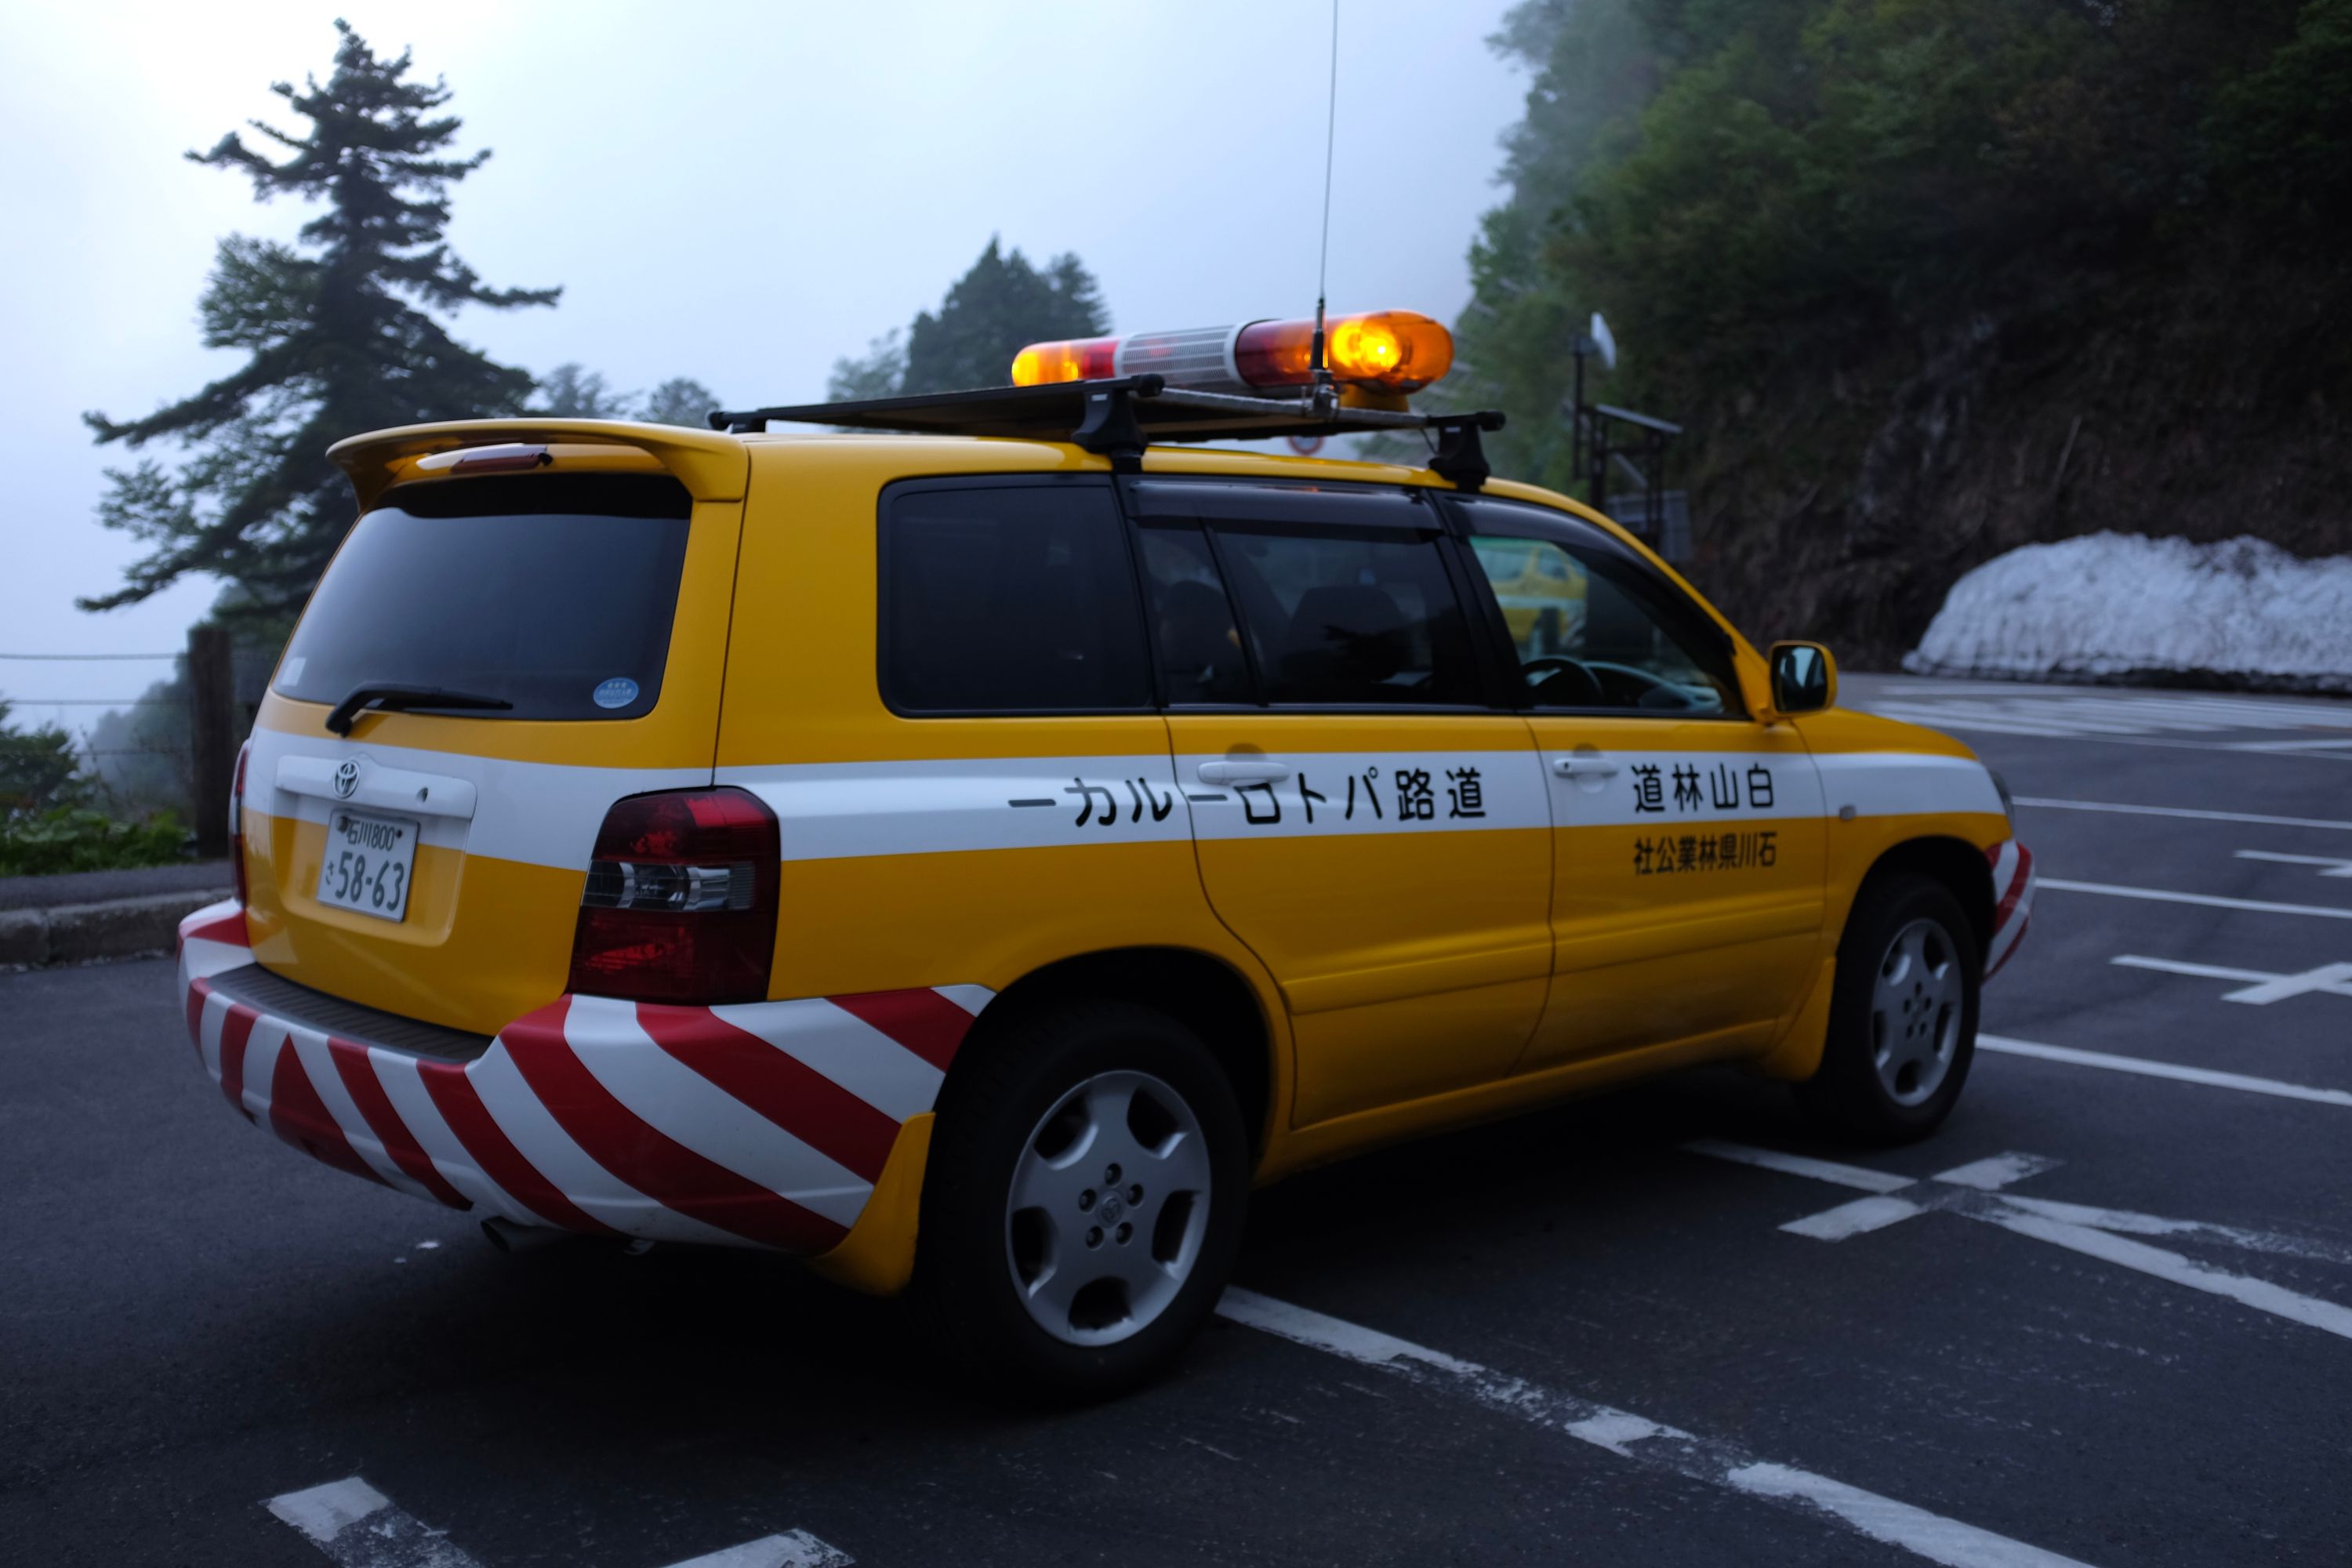 The Toyota utility vehicle, yellow and equipped with light bars, parked on a road with heaps of snow in the background.